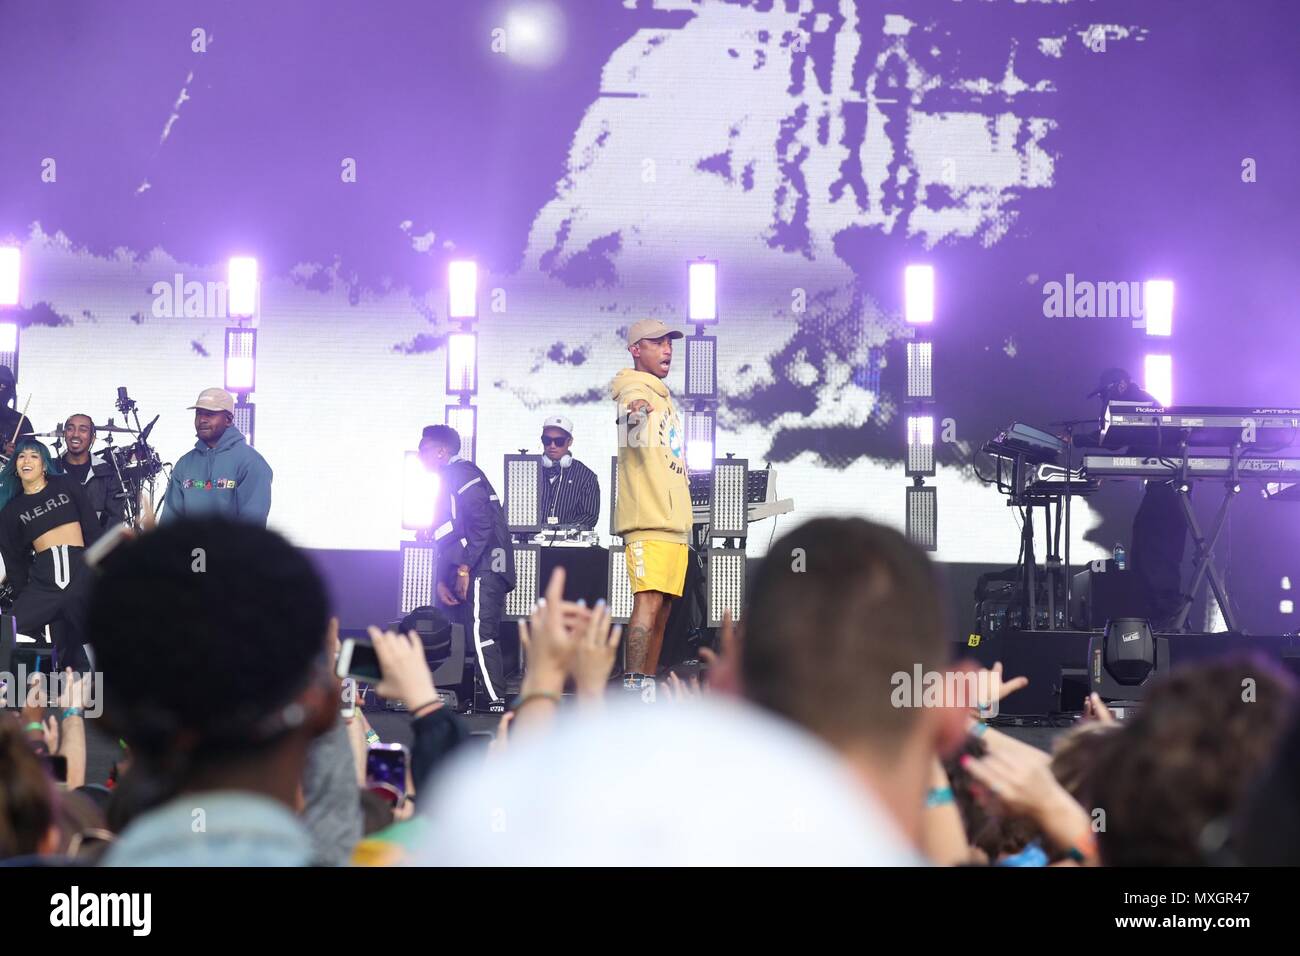 New York, NY, USA. 3rd June, 2018. Pharrell Williams of N.E.R.D. on stage for 2018 Governors Ball Music Festival - SUN, Randall's Island Park, New York, NY June 3, 2018. Credit: Rob Kim/Everett Collection/Alamy Live News Stock Photo